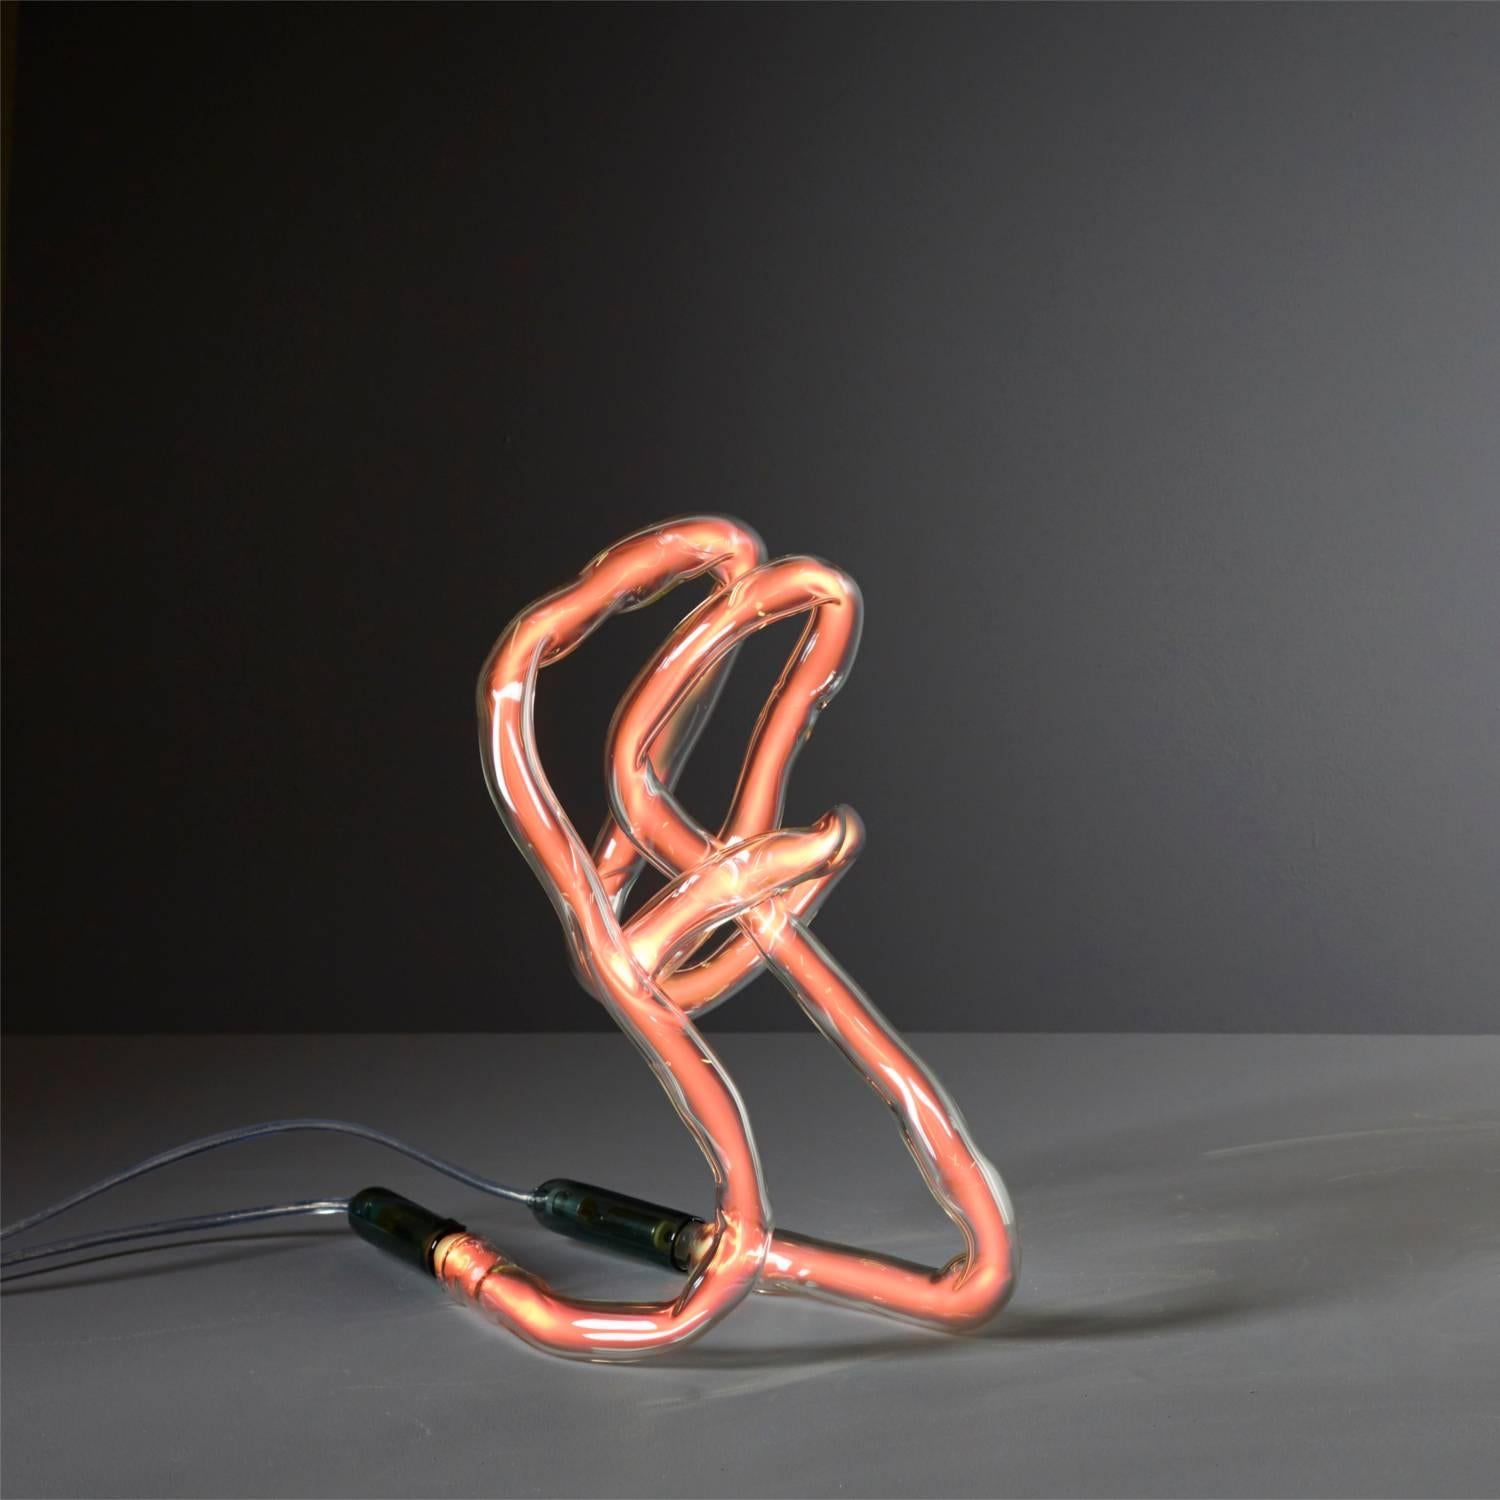 The ‘Helium table light’ by Jochen Holz is a unique, freestanding light sculpture made of borosilicate glass tubing. Each lamp is one-of-a-kind, from a small batch edition. The lights have an estimated lifetime of about 30 to 40 thousand